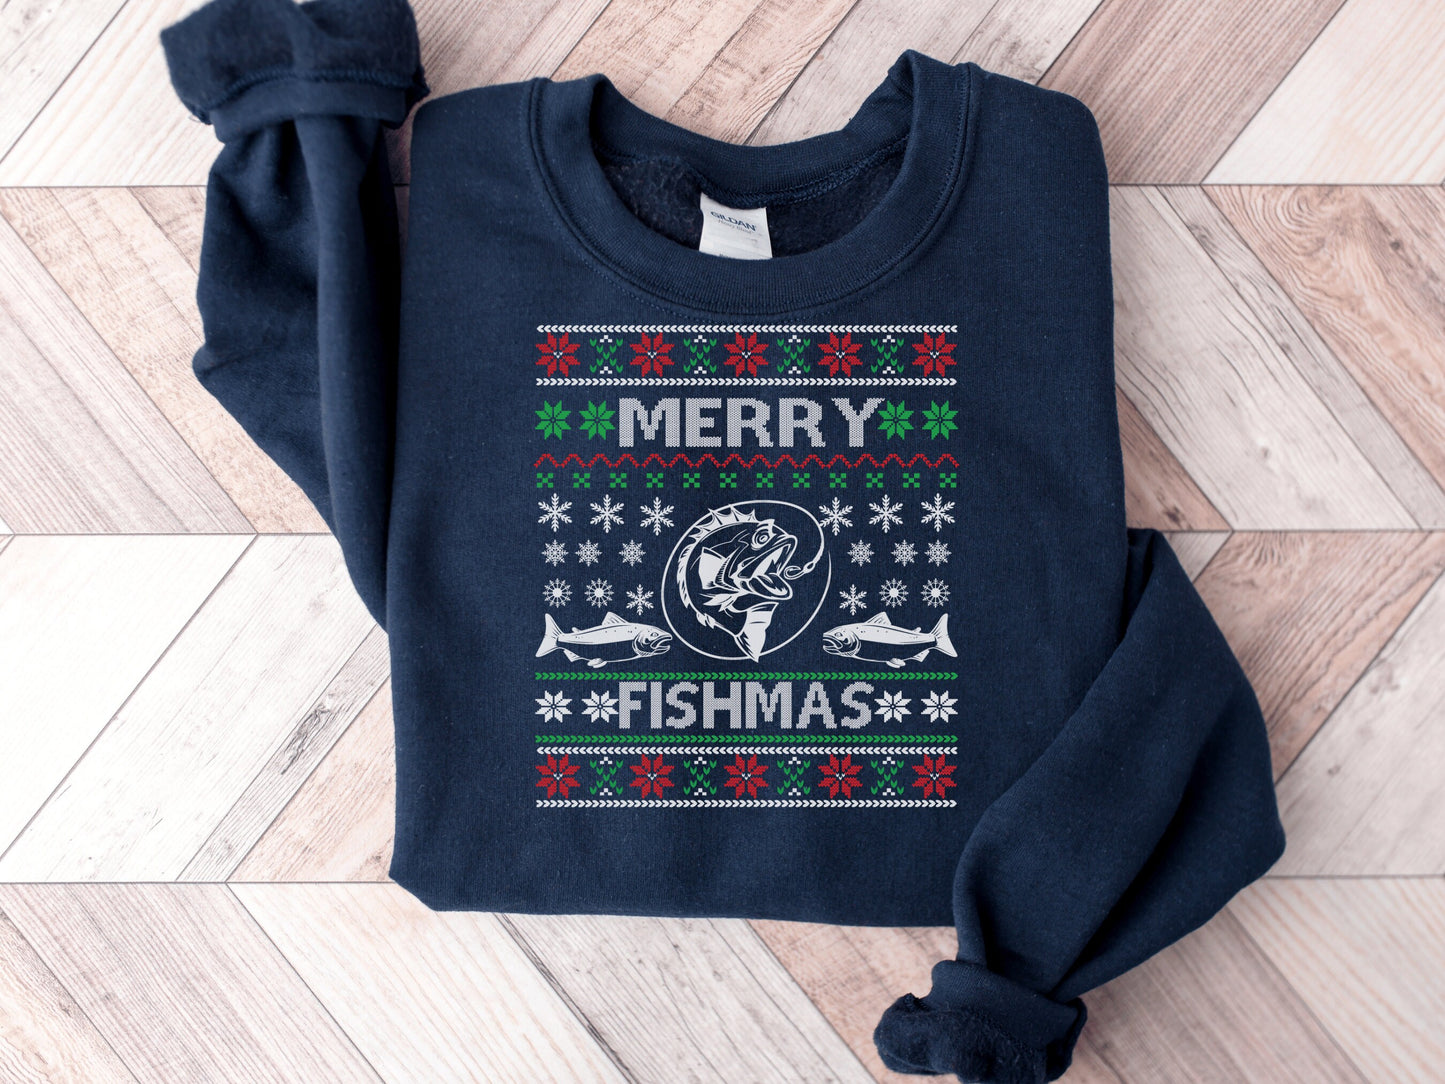 Fishing Gifts for Men, Ugly Christmas Sweater for Men, Merry Fishmas Ugly Christmas Sweater, Merry Fishmas Fishing Ugly Christmas Sweater